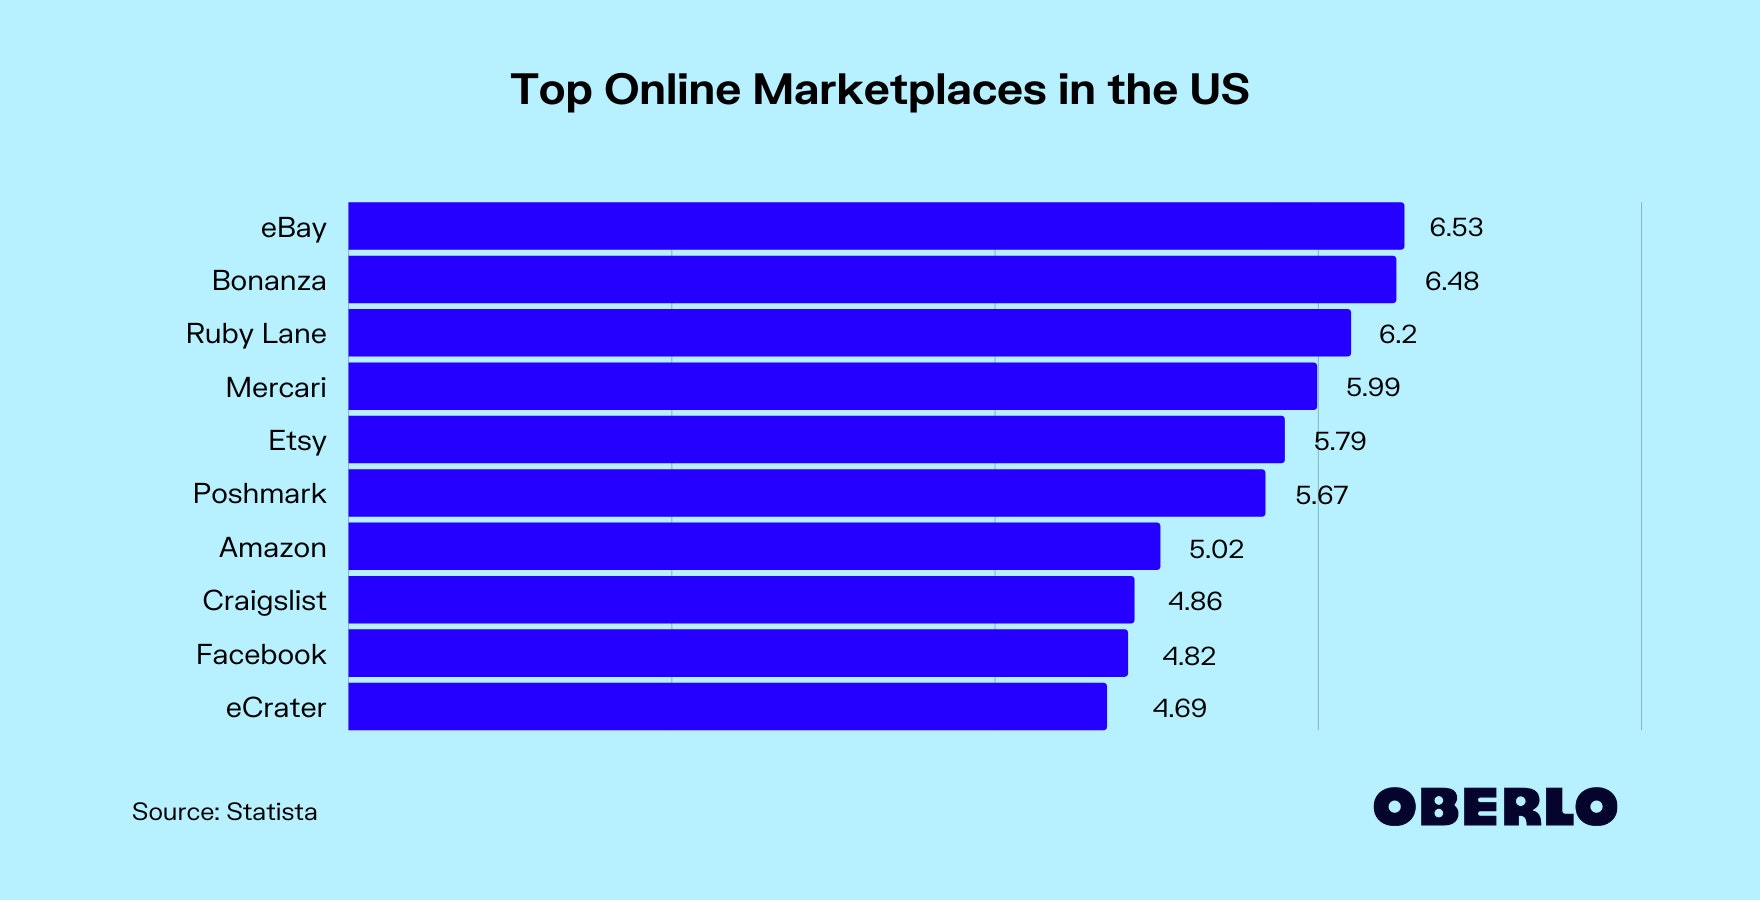 Top Online Marketplaces in the US